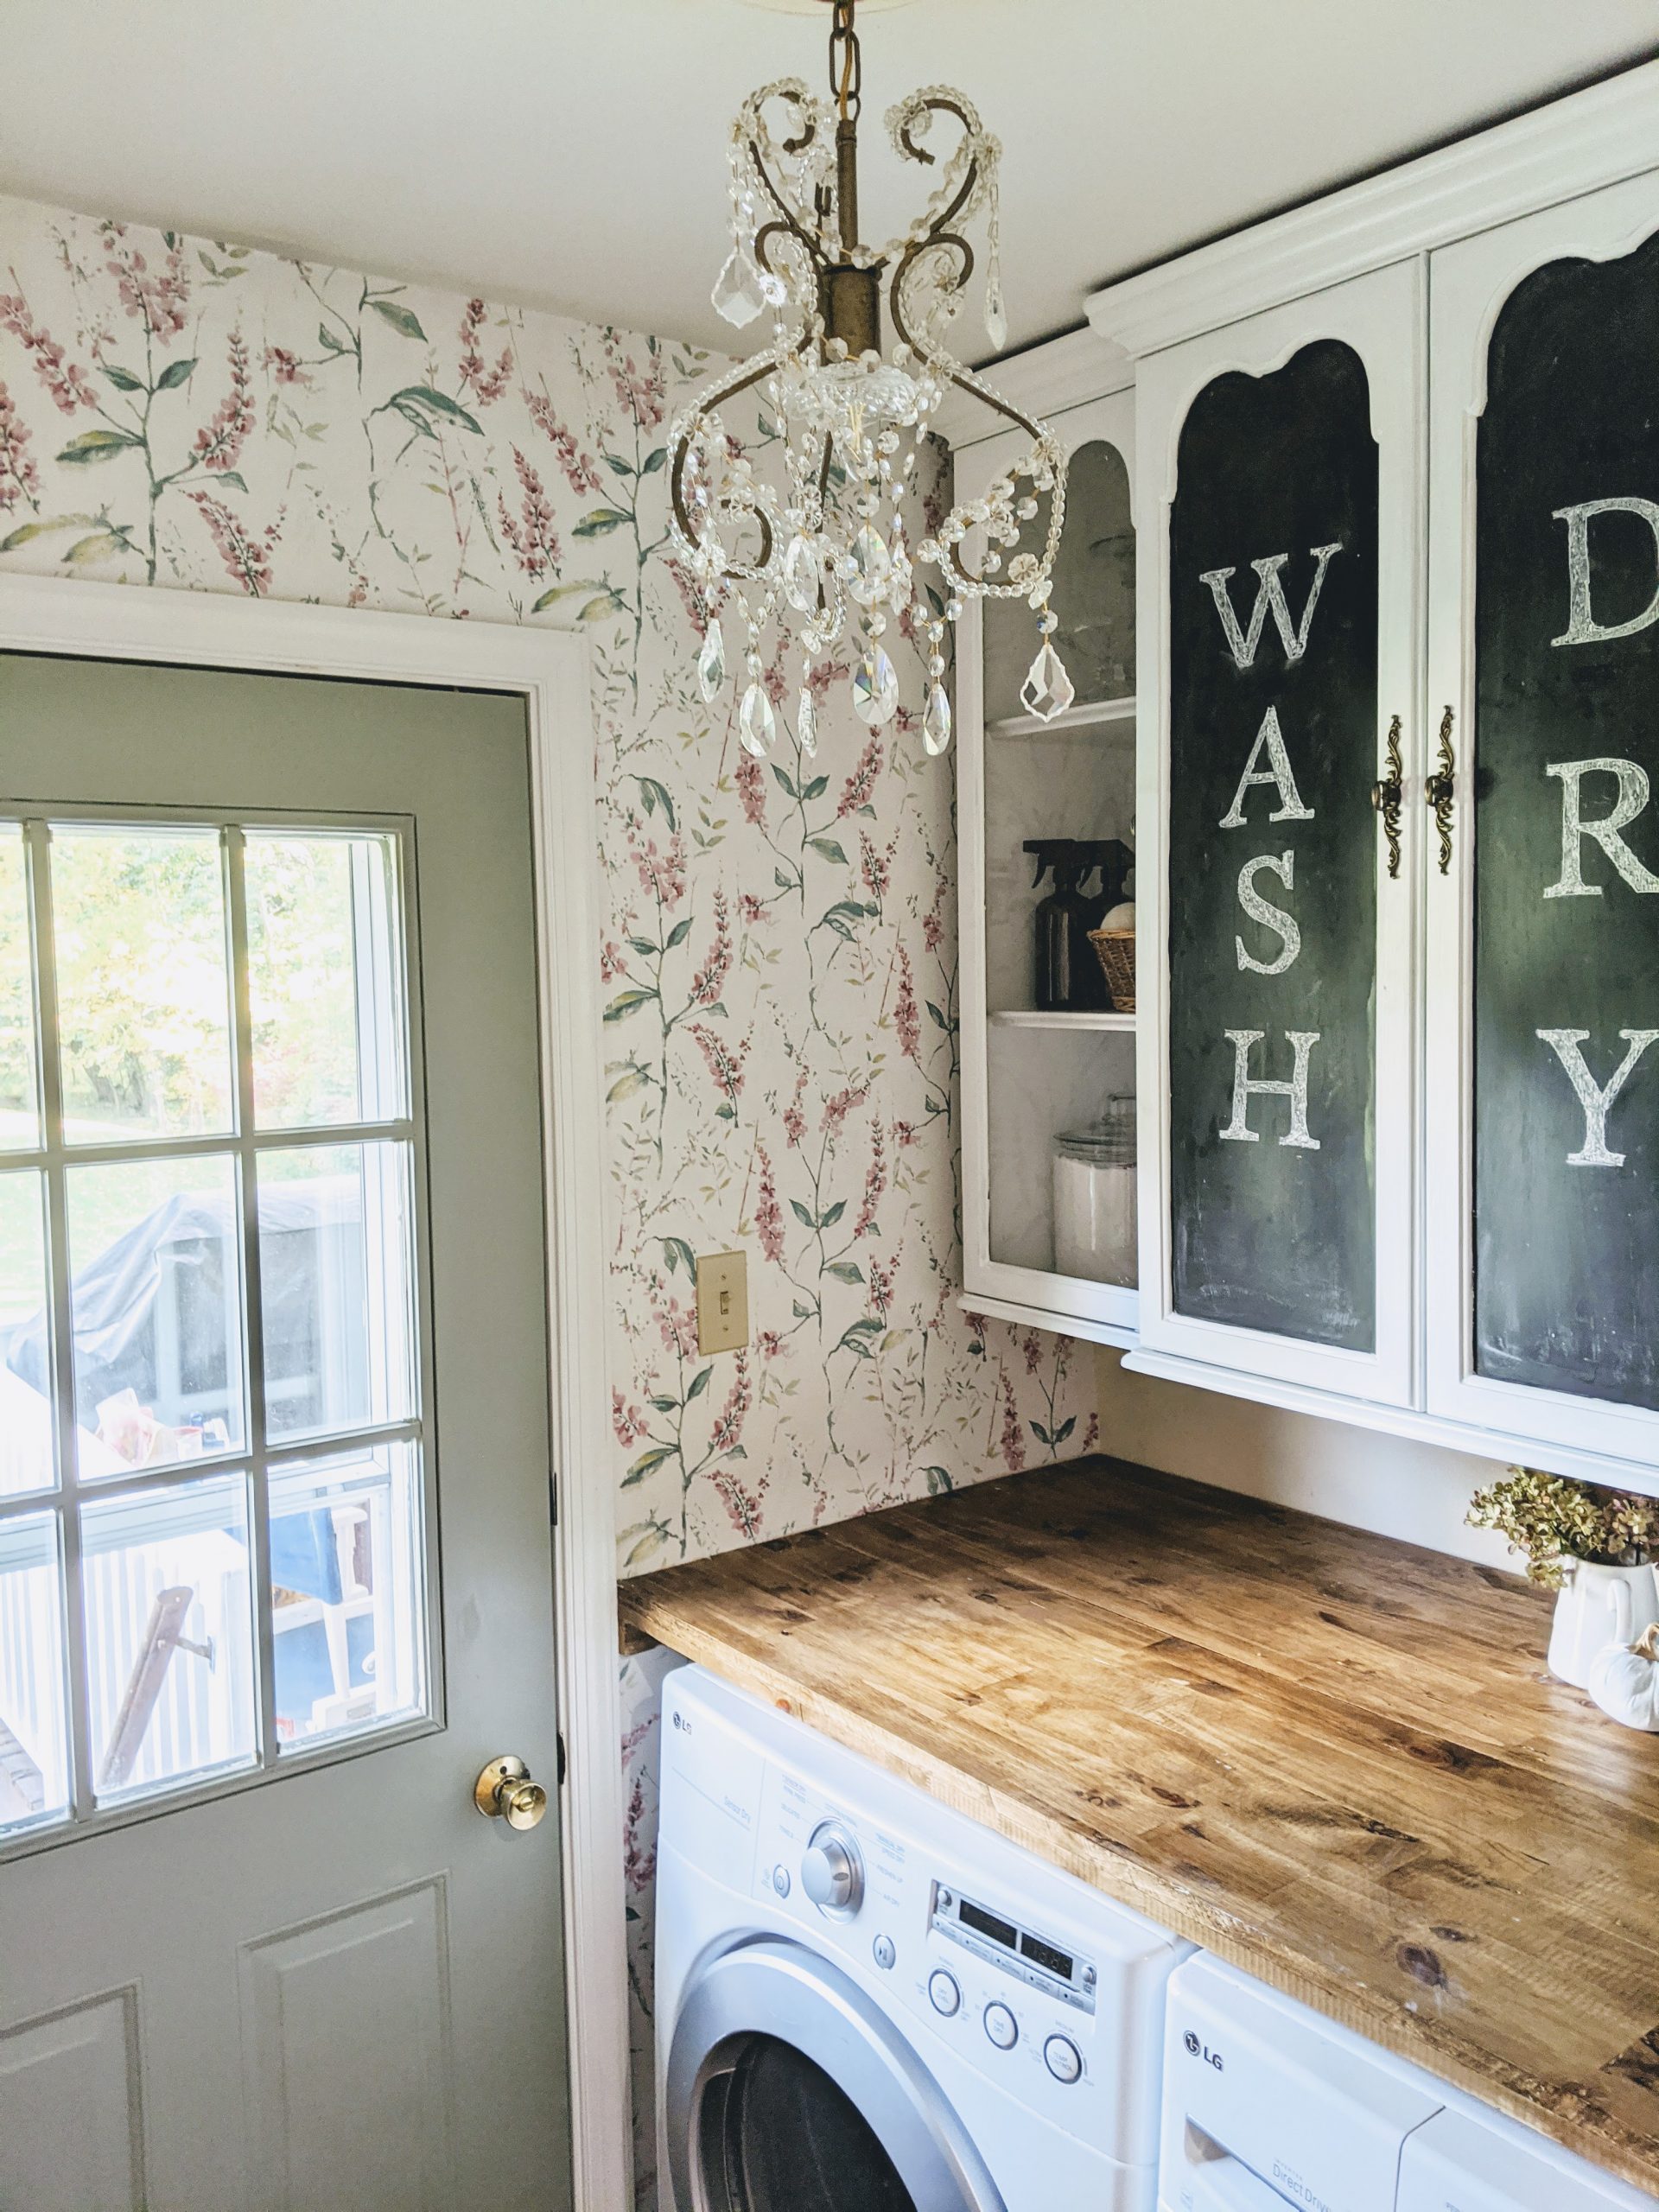 The ultimate laundry room organization!, Thrifty Decor Chick